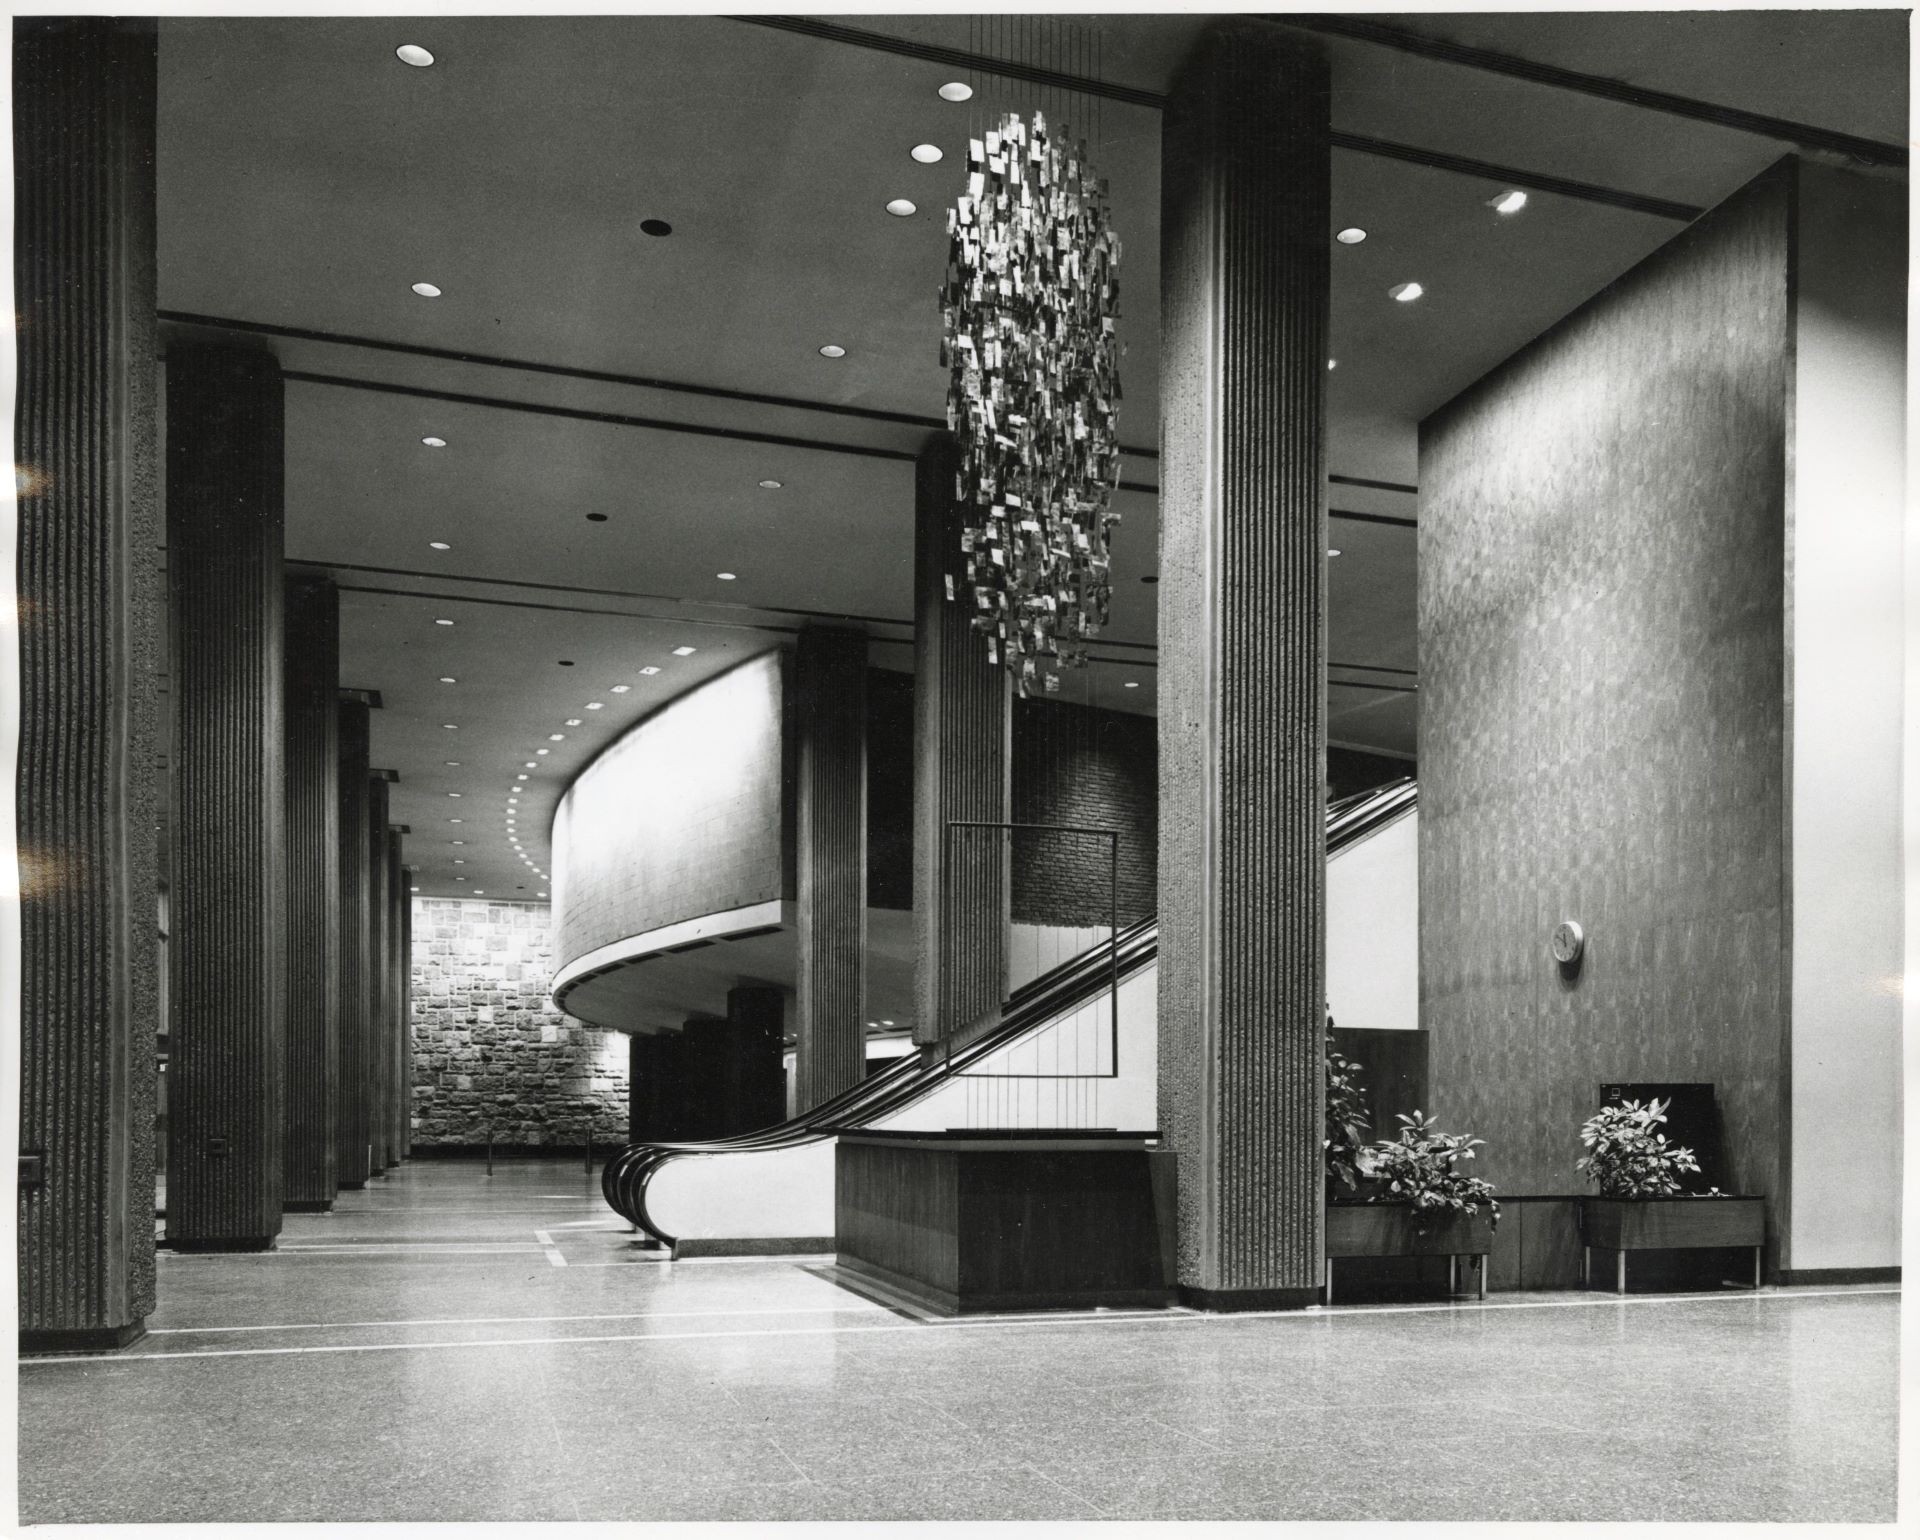 A vintage black and white photo of an elegant interior hall with a curving staircase and decorative light fixtures, reflecting mid-century modern design.